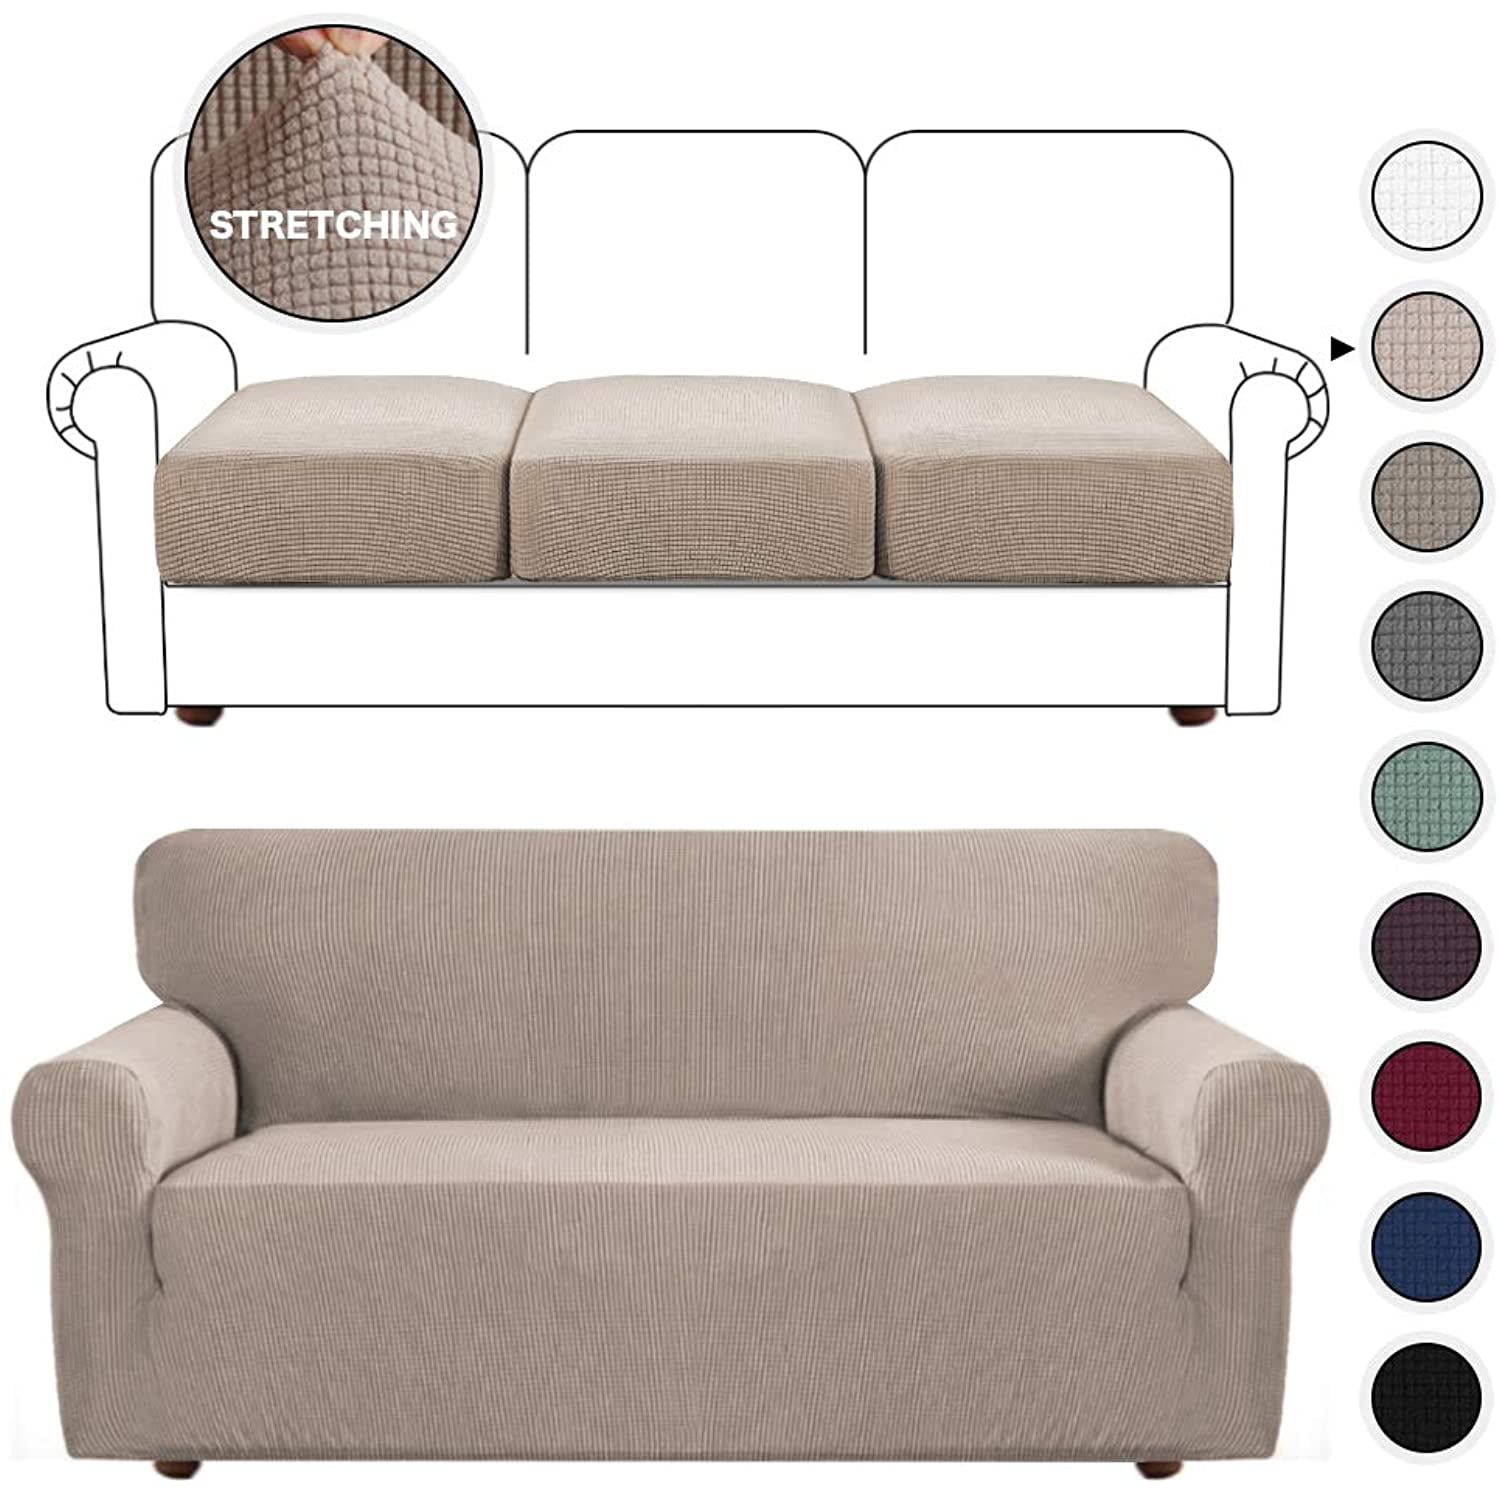 Stretch Sofa Slipcover for 3 Cushion Couch Furniture Protector with Separate Cushion Cover Khaki